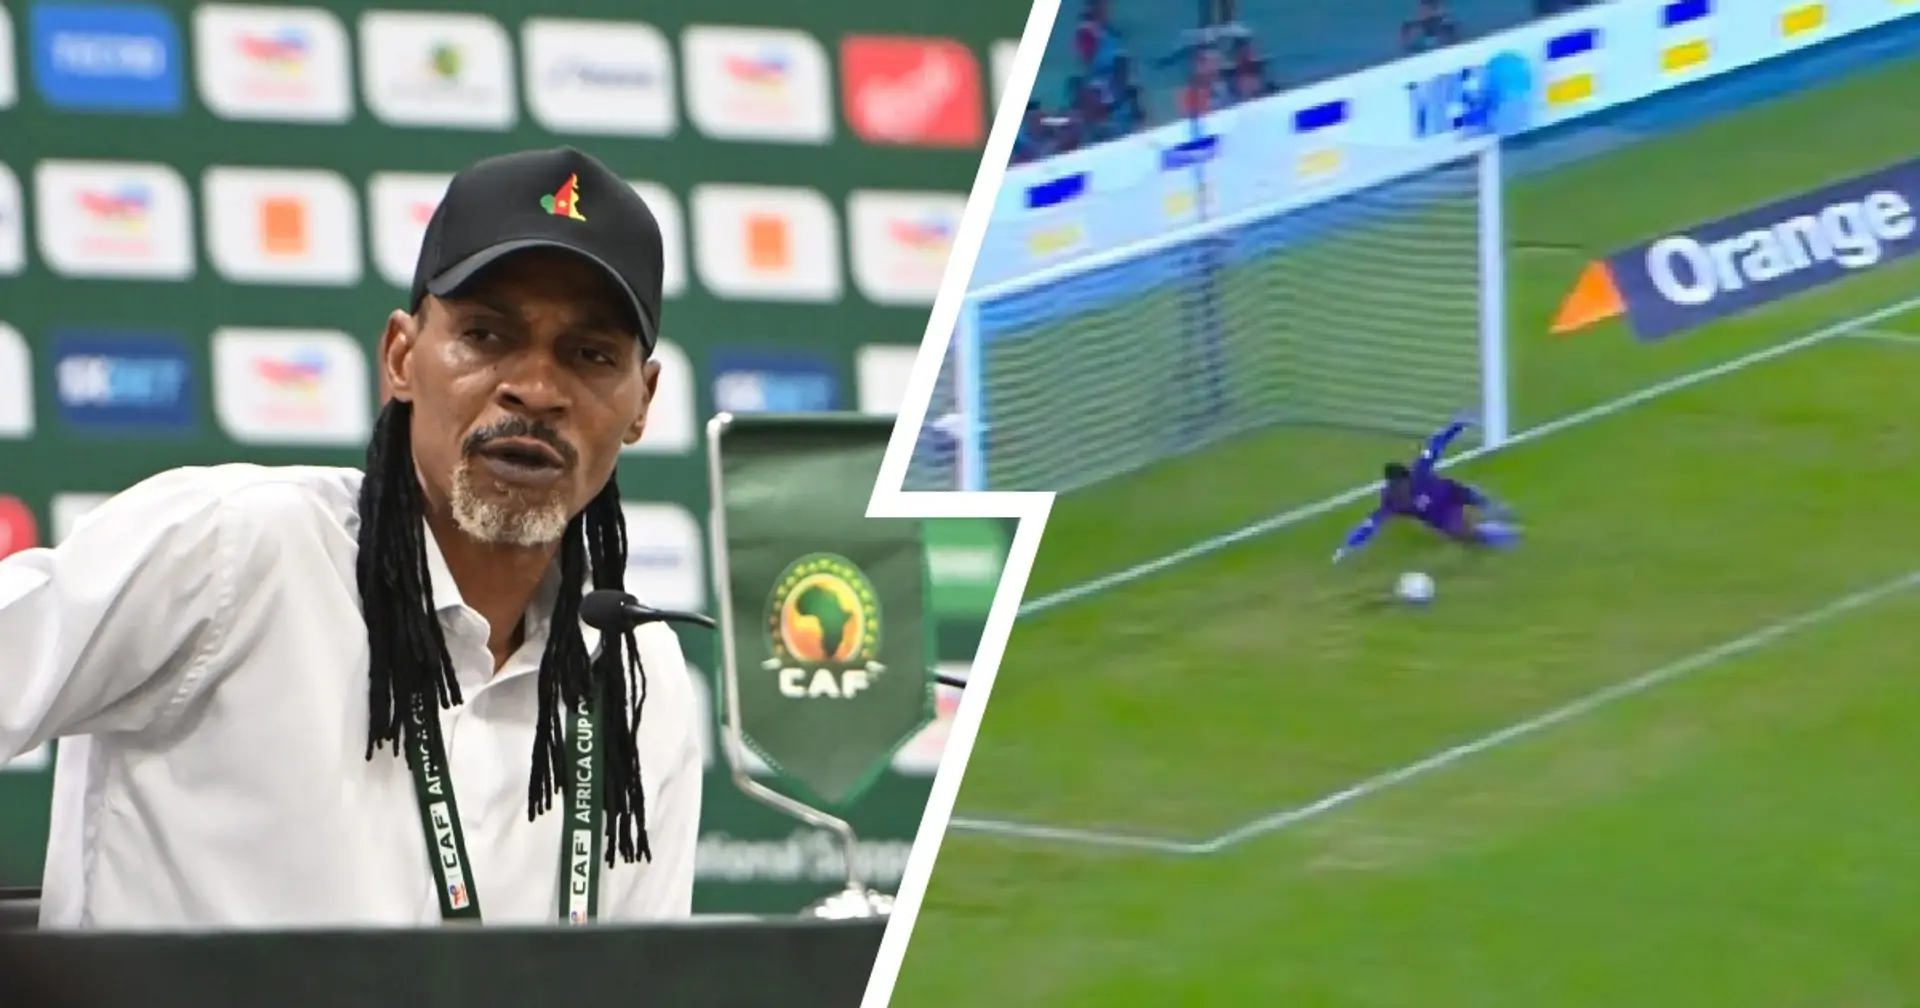 Cameroon coach reveals who should be blamed for Senegal defeat - not Onana